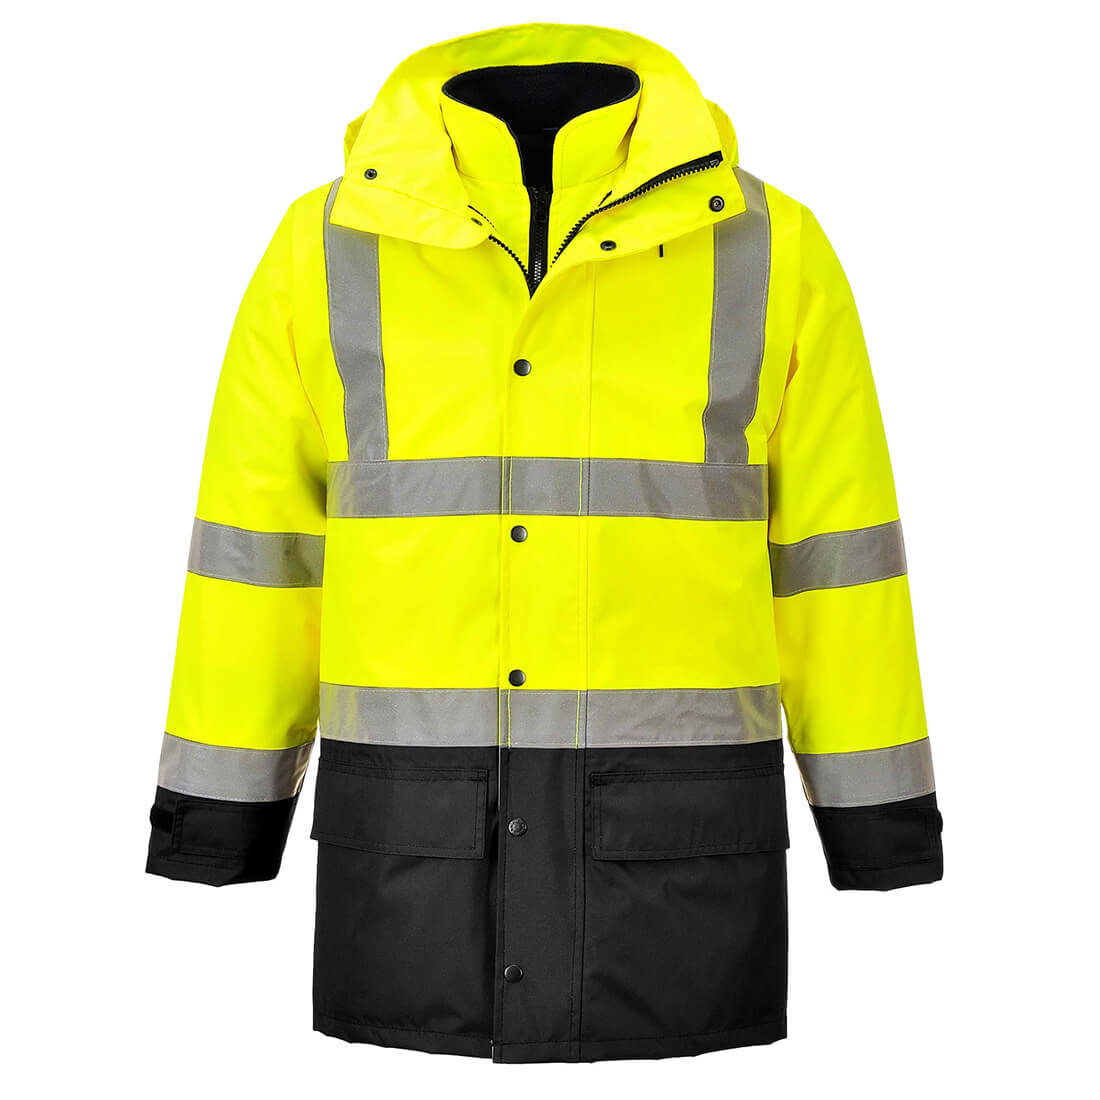 Photo of Oxford Weave 300d Class 3 Hi Vis 5-in1 Executive Jacket Yellow / Black 3xl